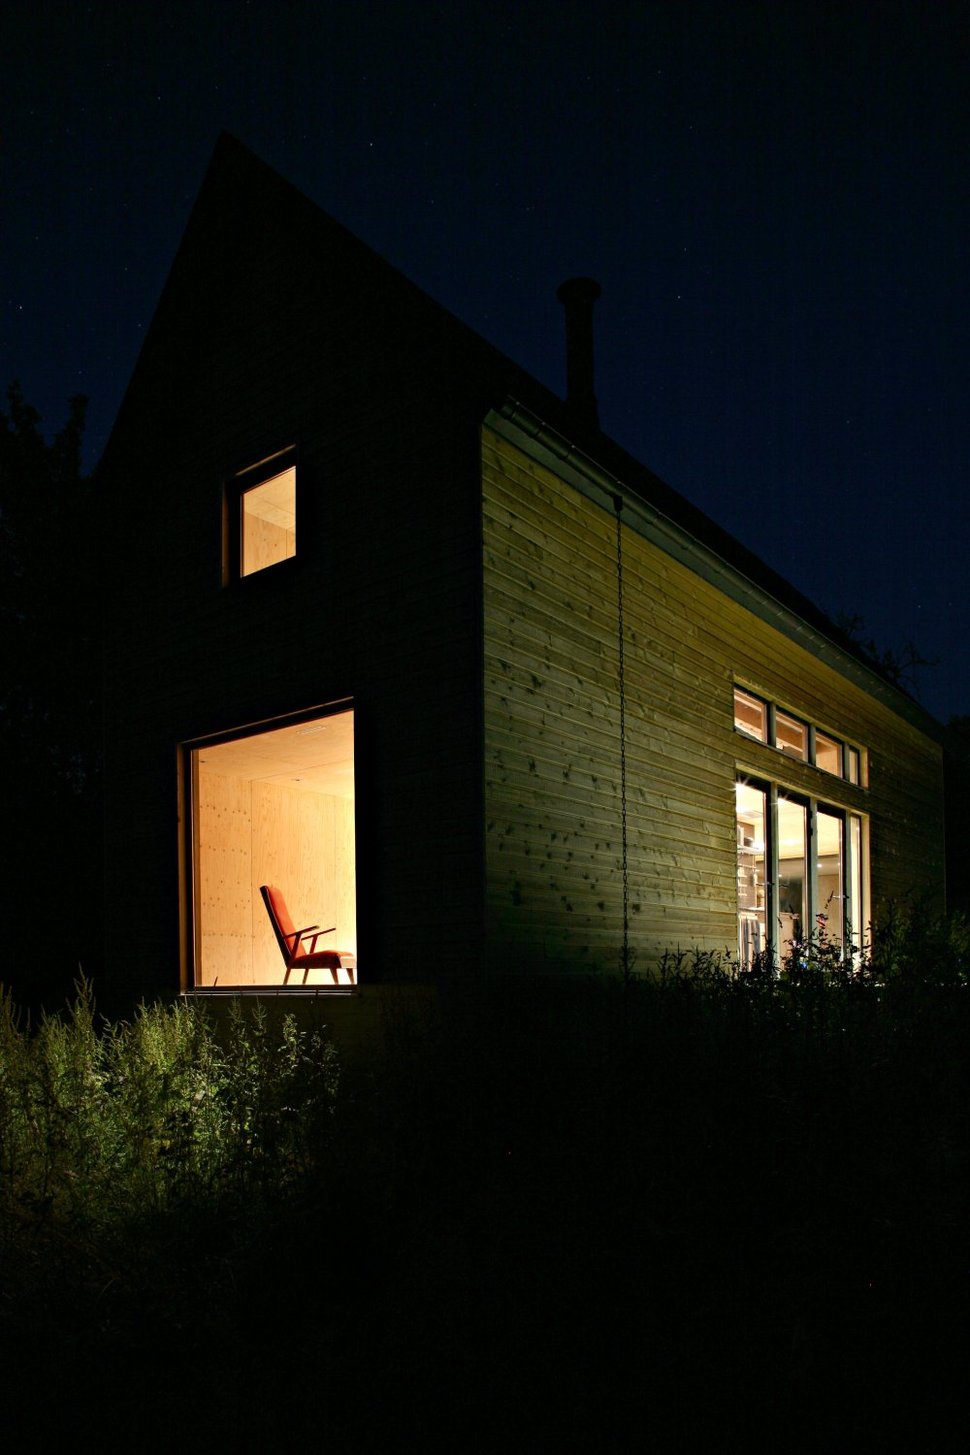 barn-style-weekend-cabin-embraces-simple-life-4b-exterior.jpg